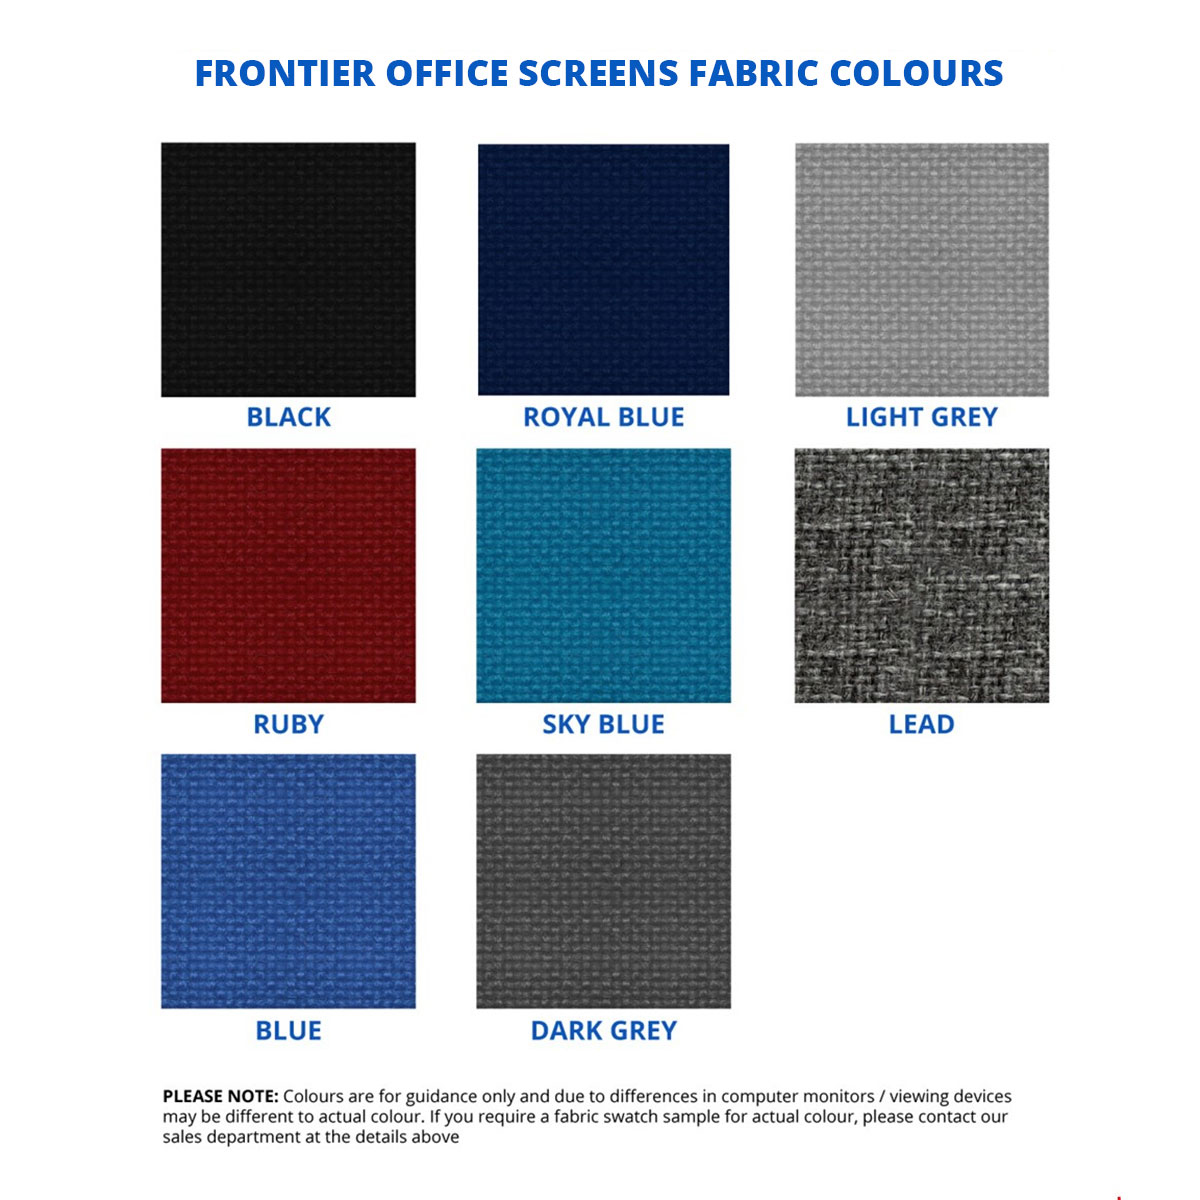 FRONTIER® Office Screens Are Available in 8 Fabric Colour Options